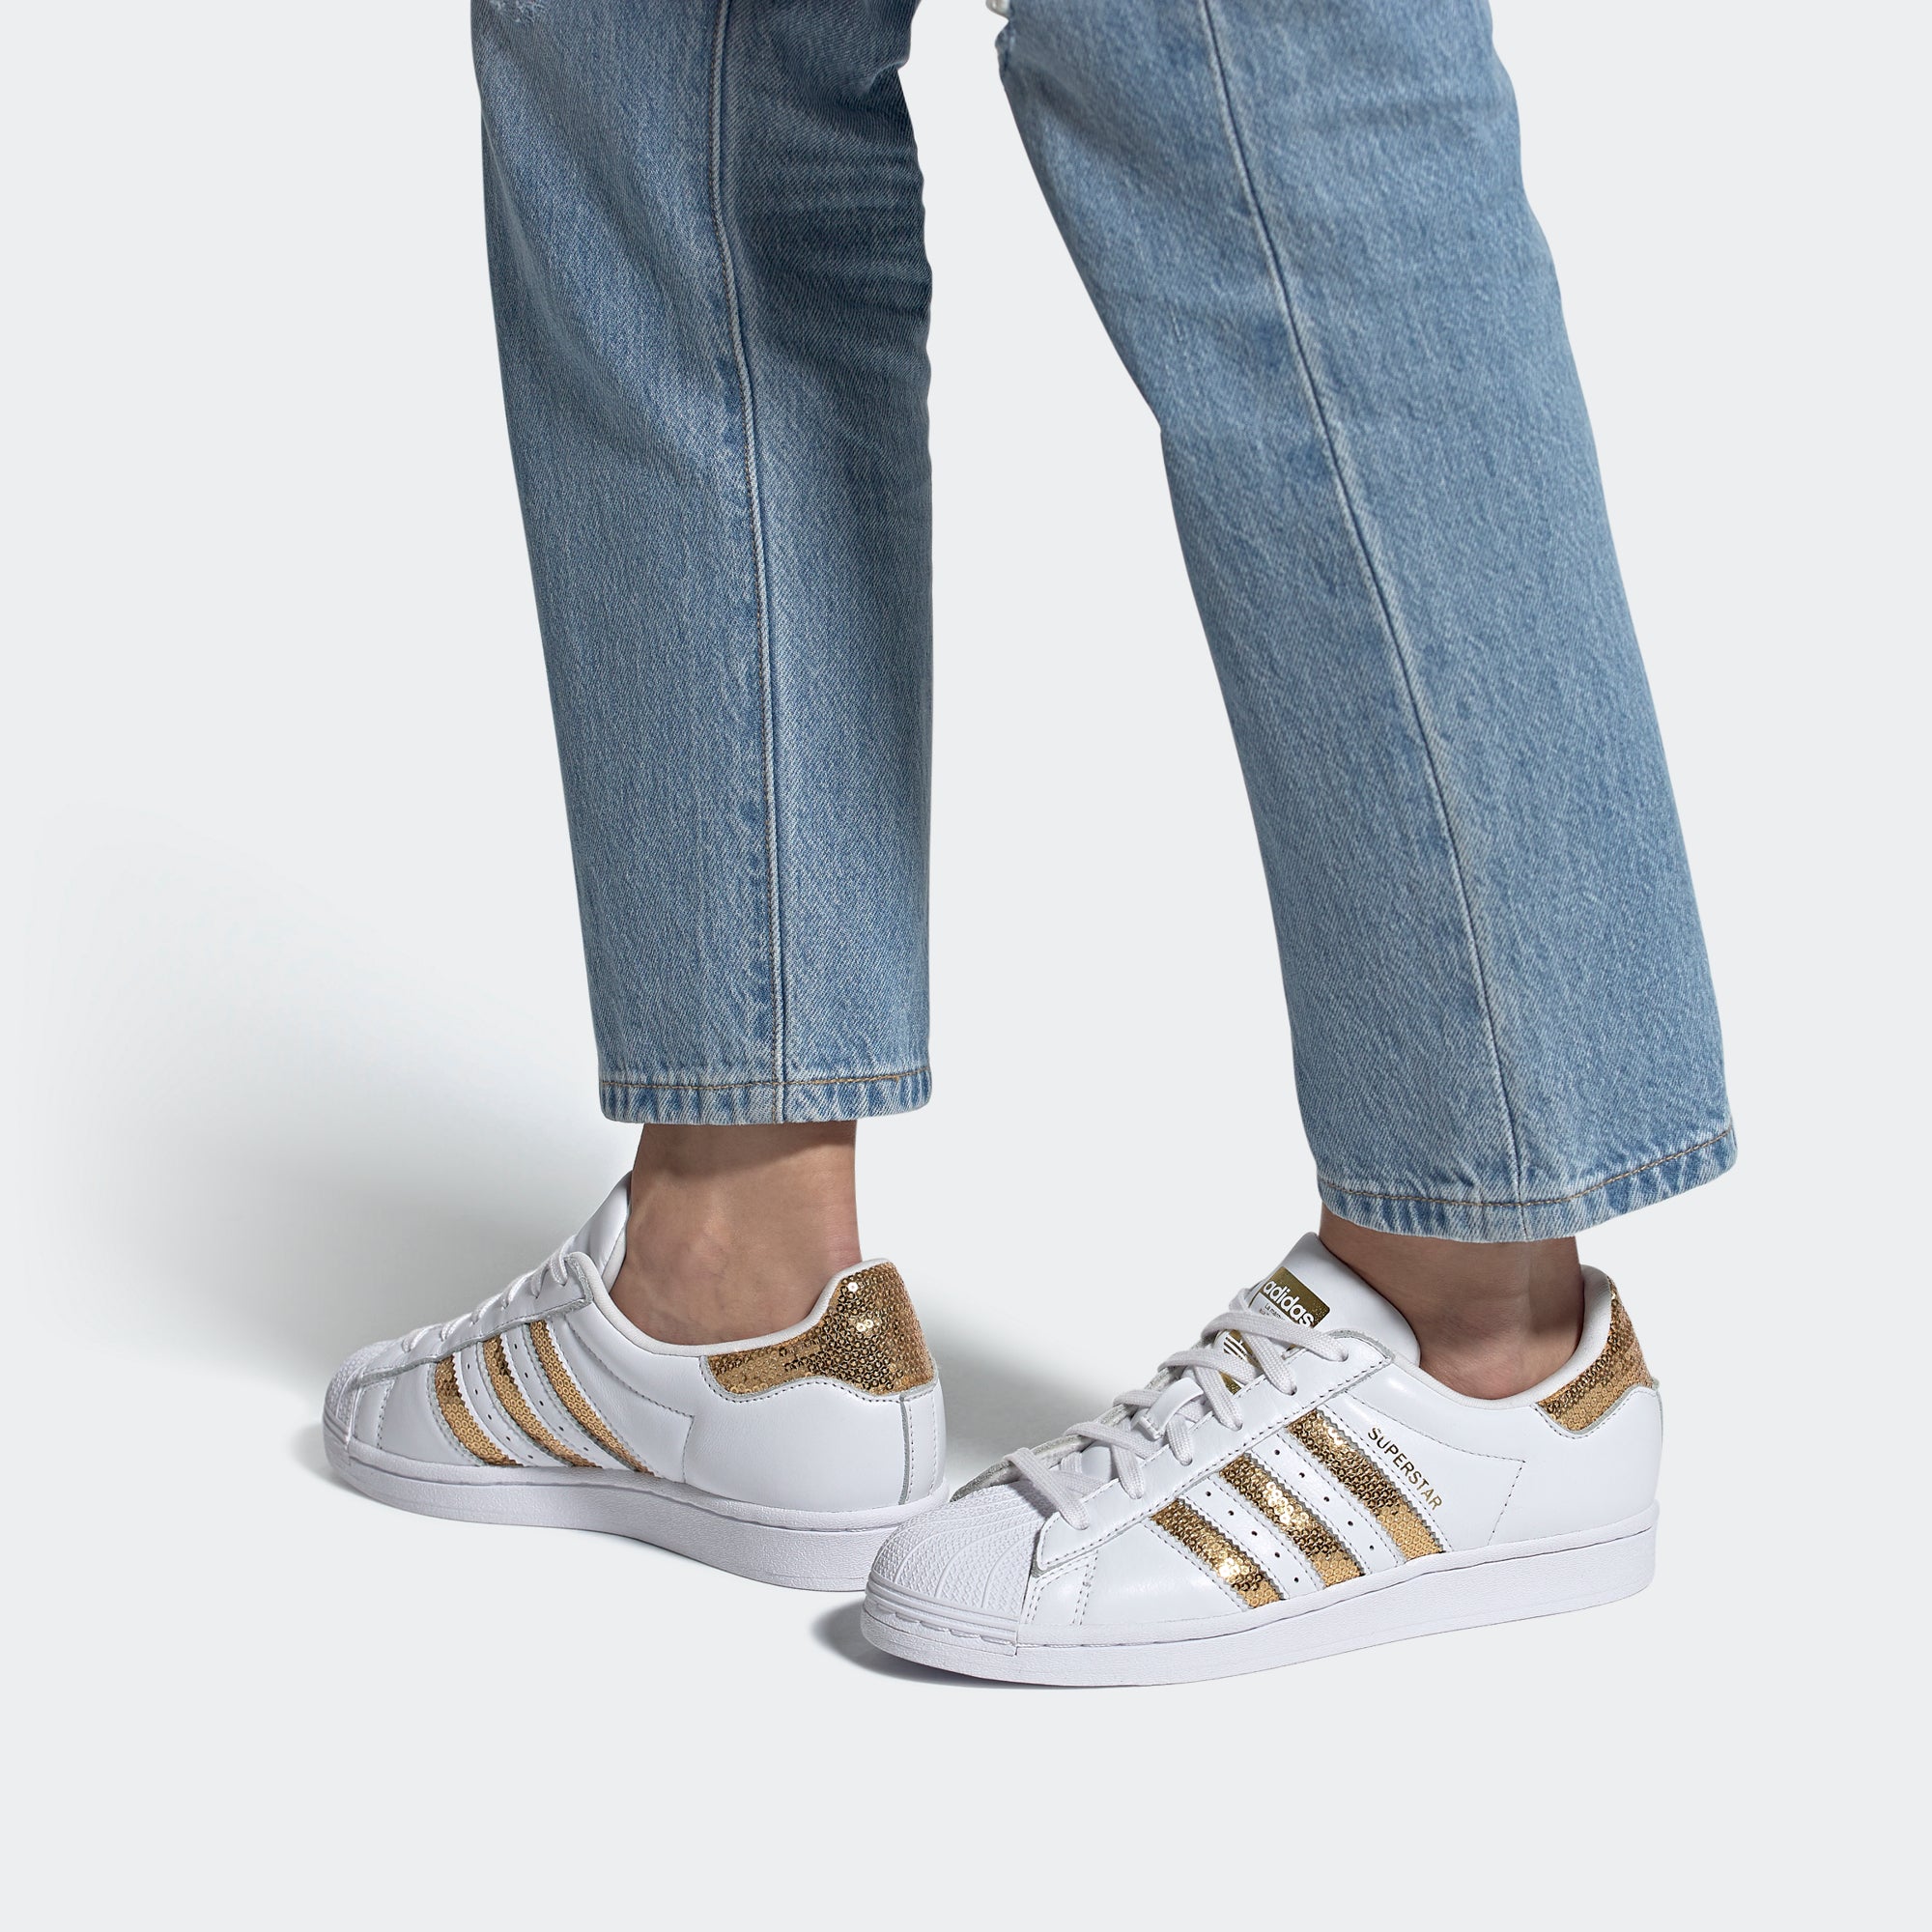 Ansættelse linned Calamity Women's adidas Superstar Shoes White Gold G55658 | Chicago City Sports